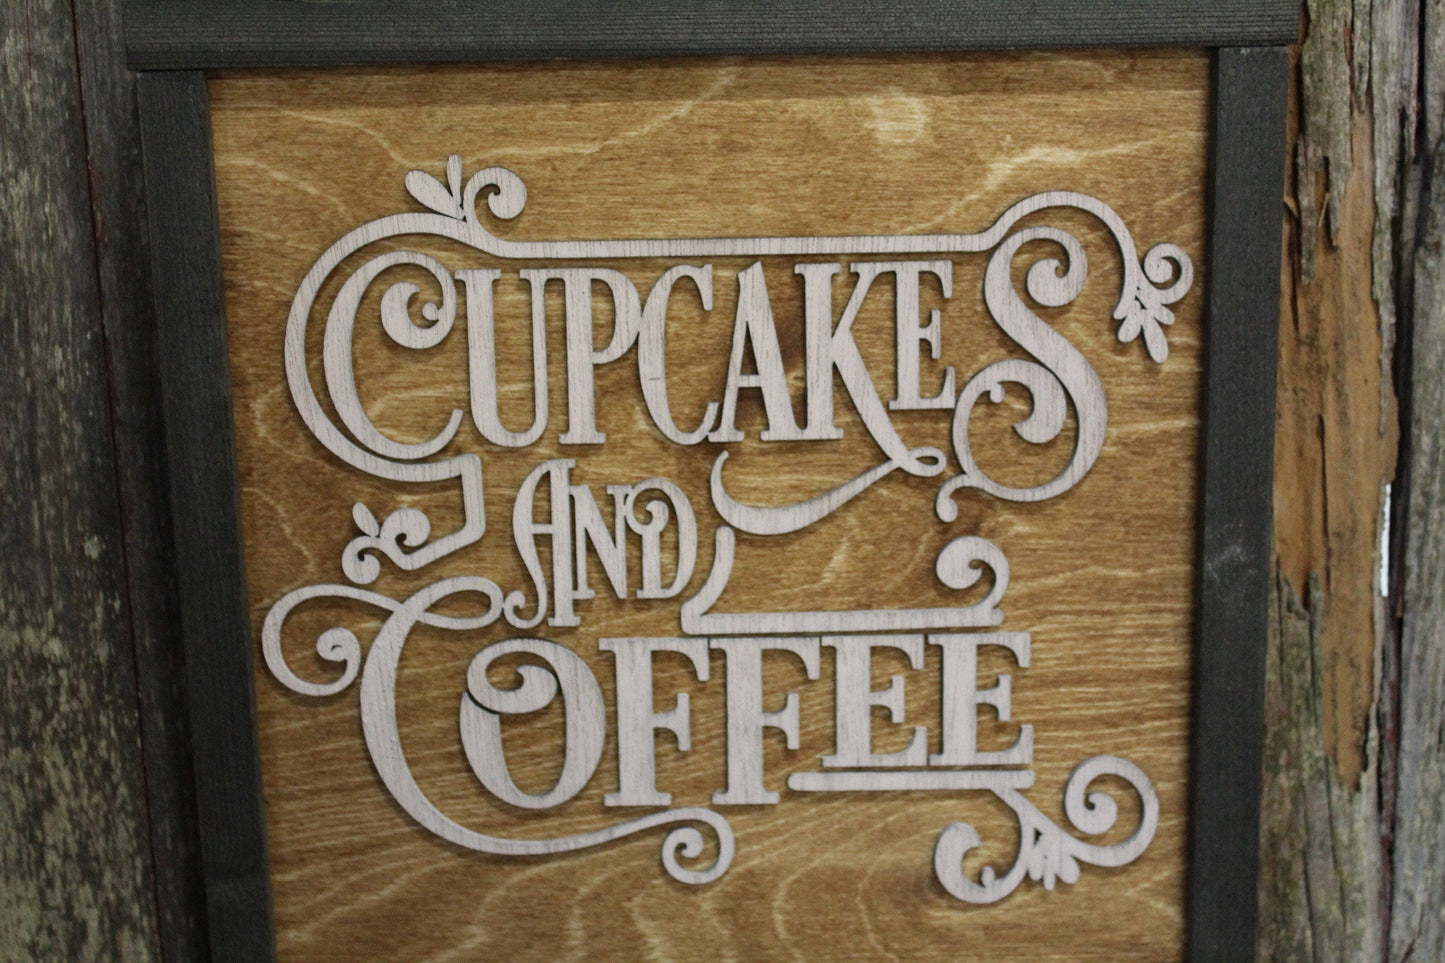 Cupcakes and Coffee Script Raised Text Wood Sign 3D Kitchen Sign Bakery Decoration Dessert Bar Coffee Bar Rustic Primitive Wall Decor